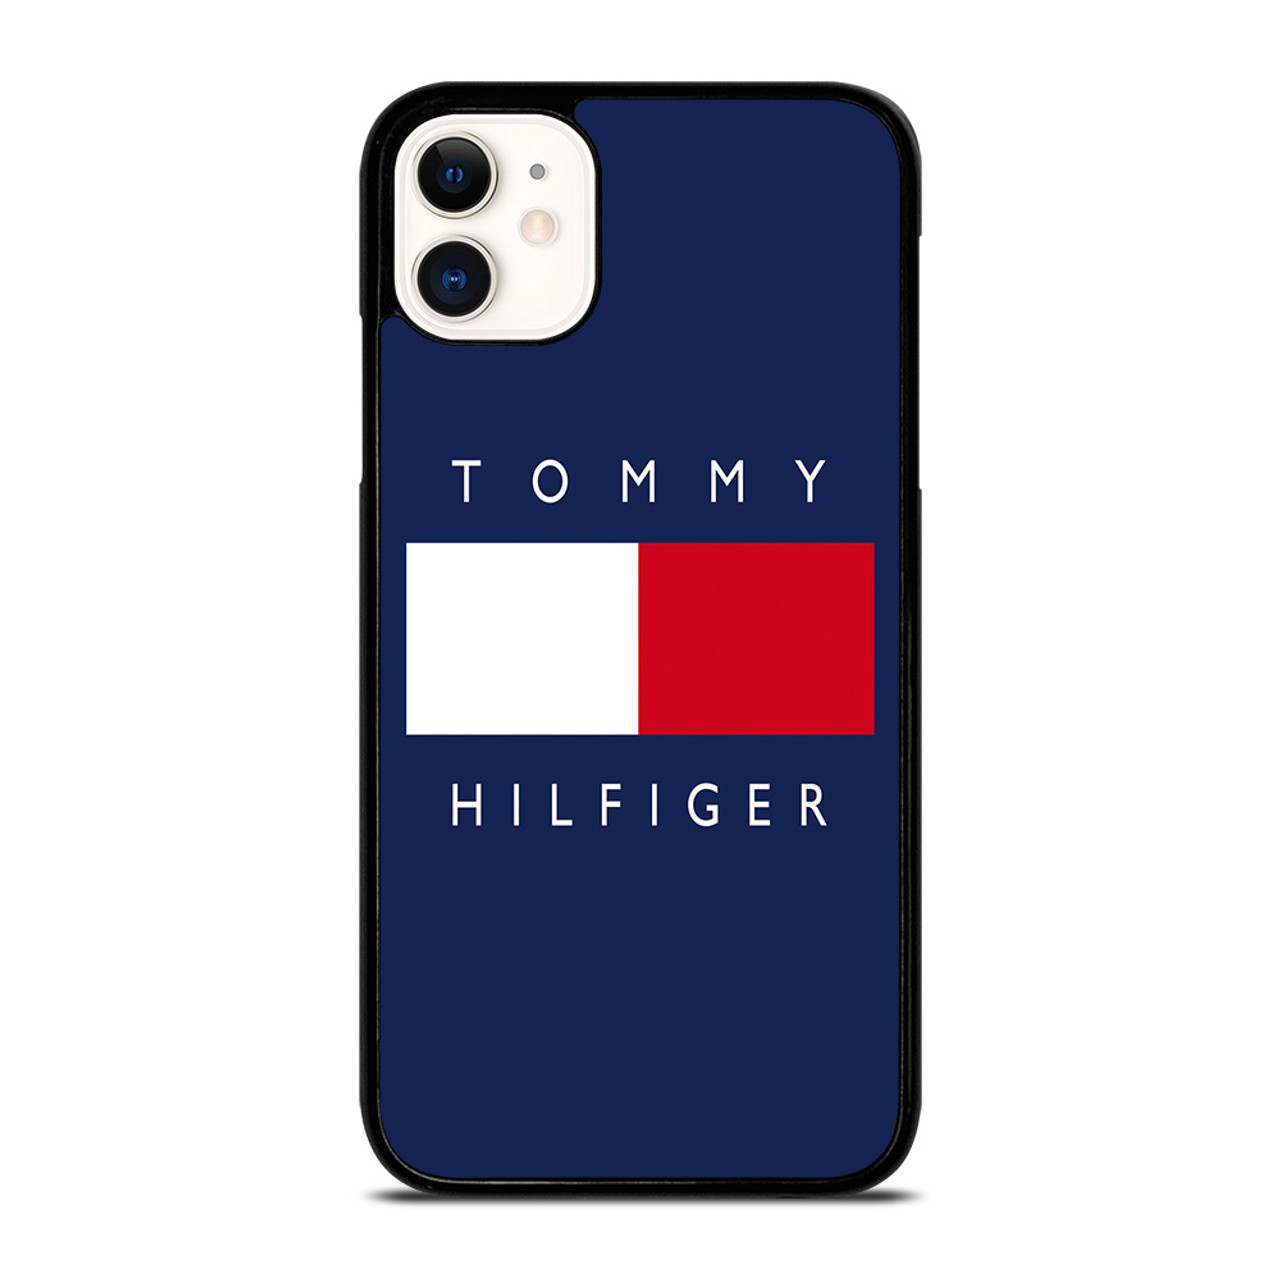 TOMMY HILFIGER 11 Case Cover